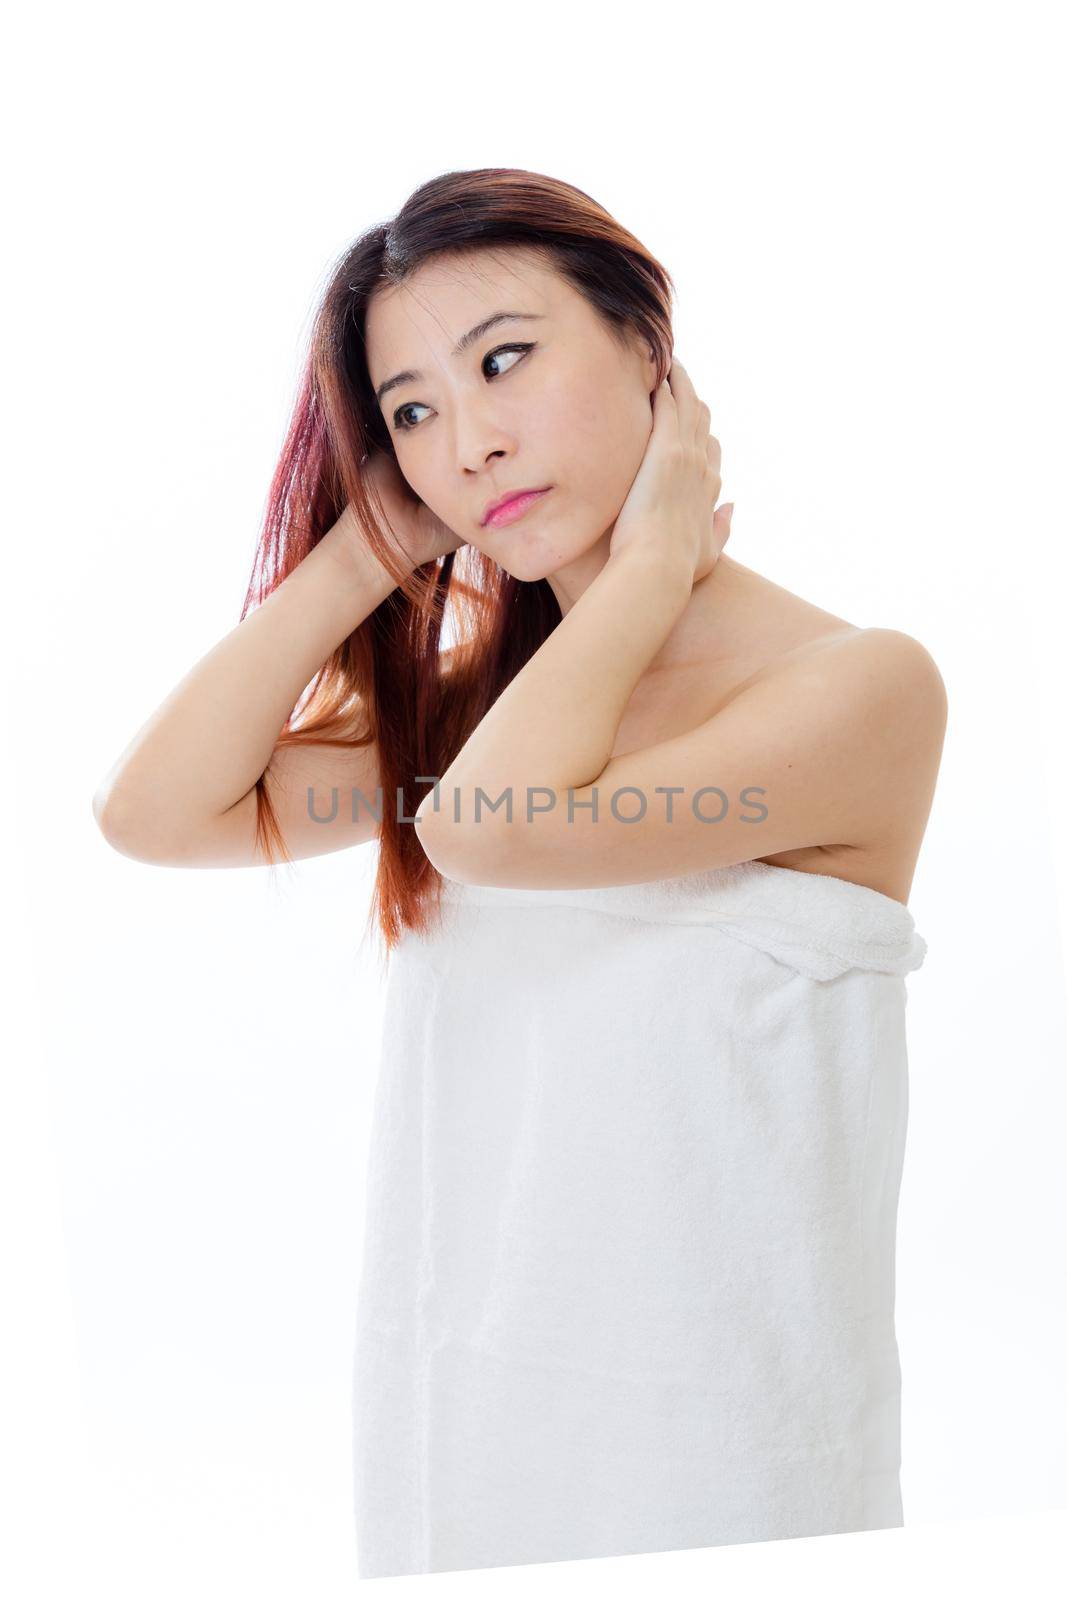 Chinese-American woman wearing a white towel on body, isolated, beauty concept